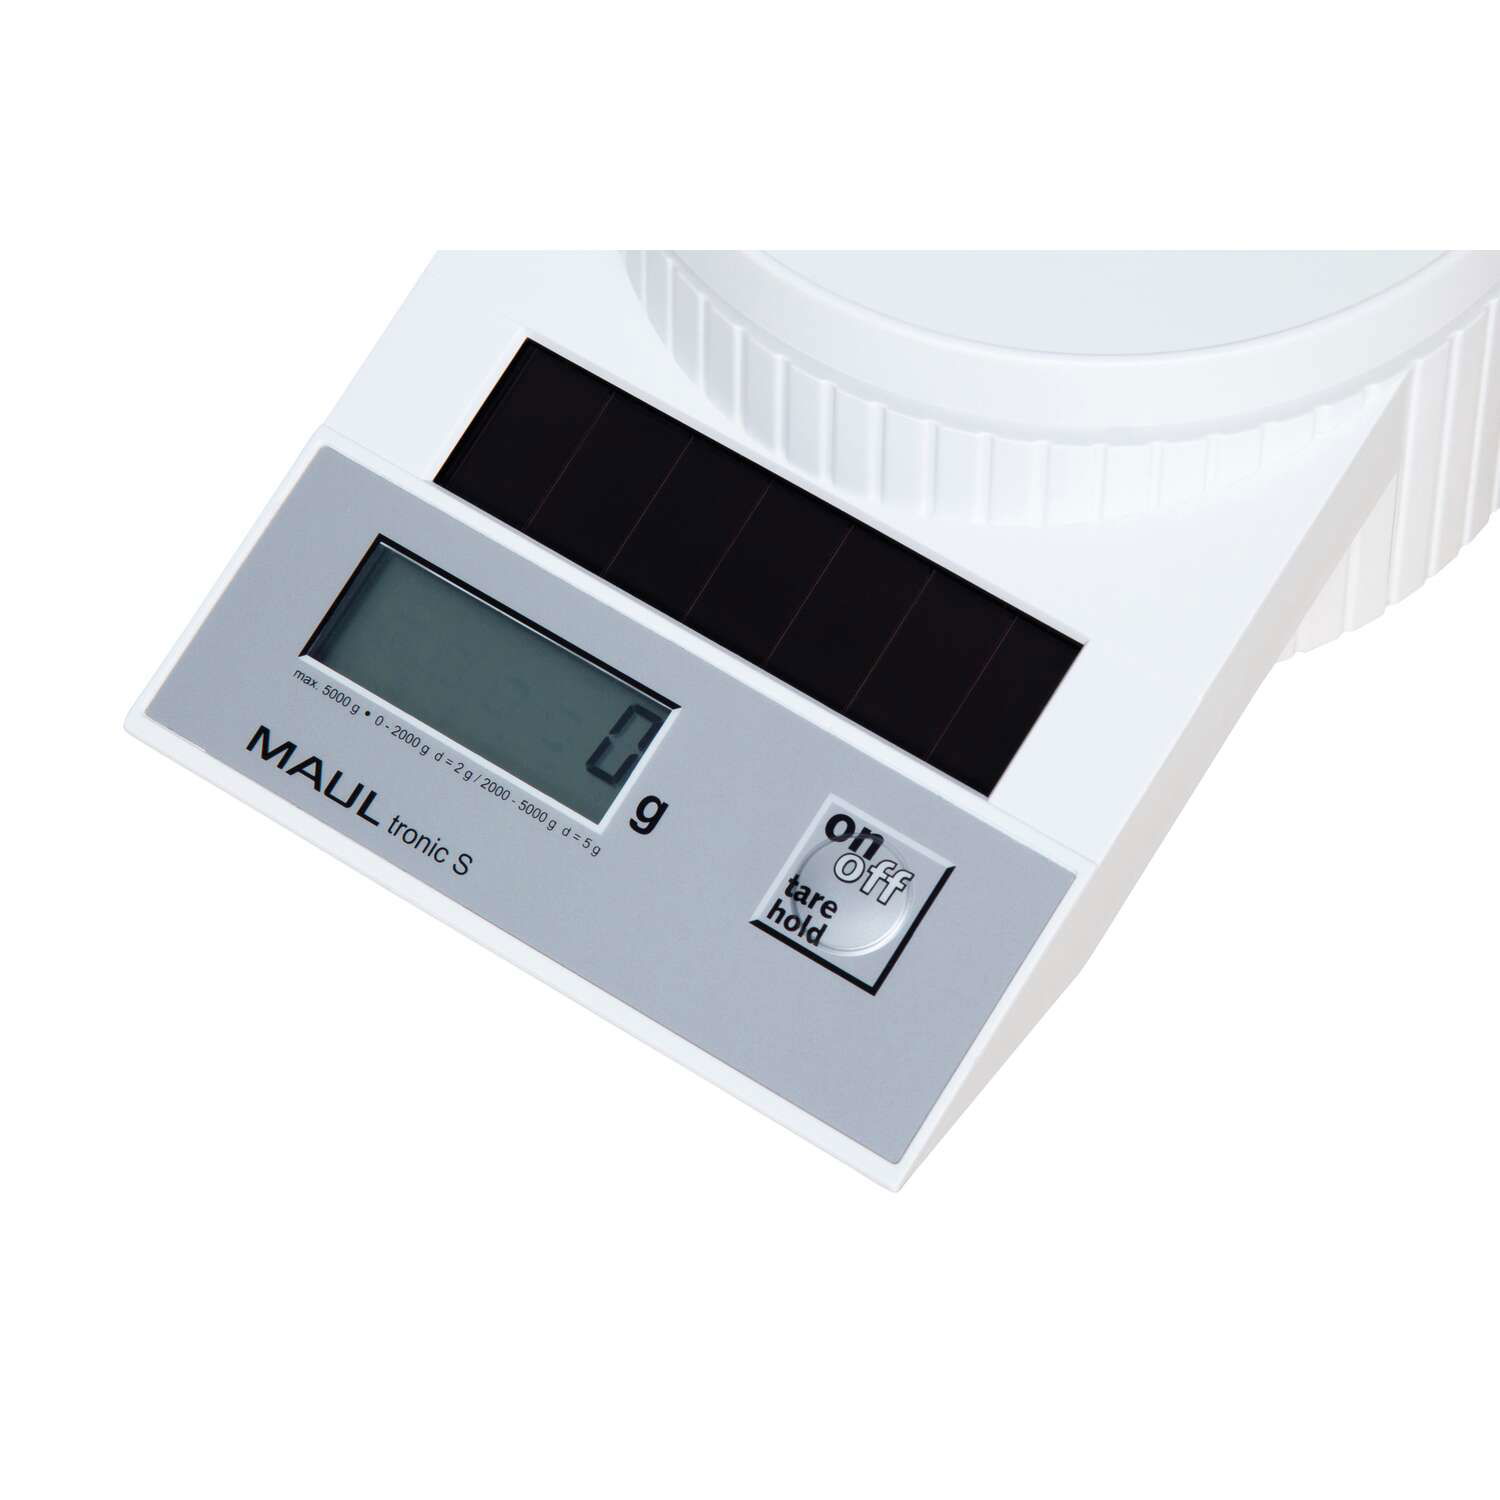 Solar-Briefwaage MAULtronic S, 5000 g